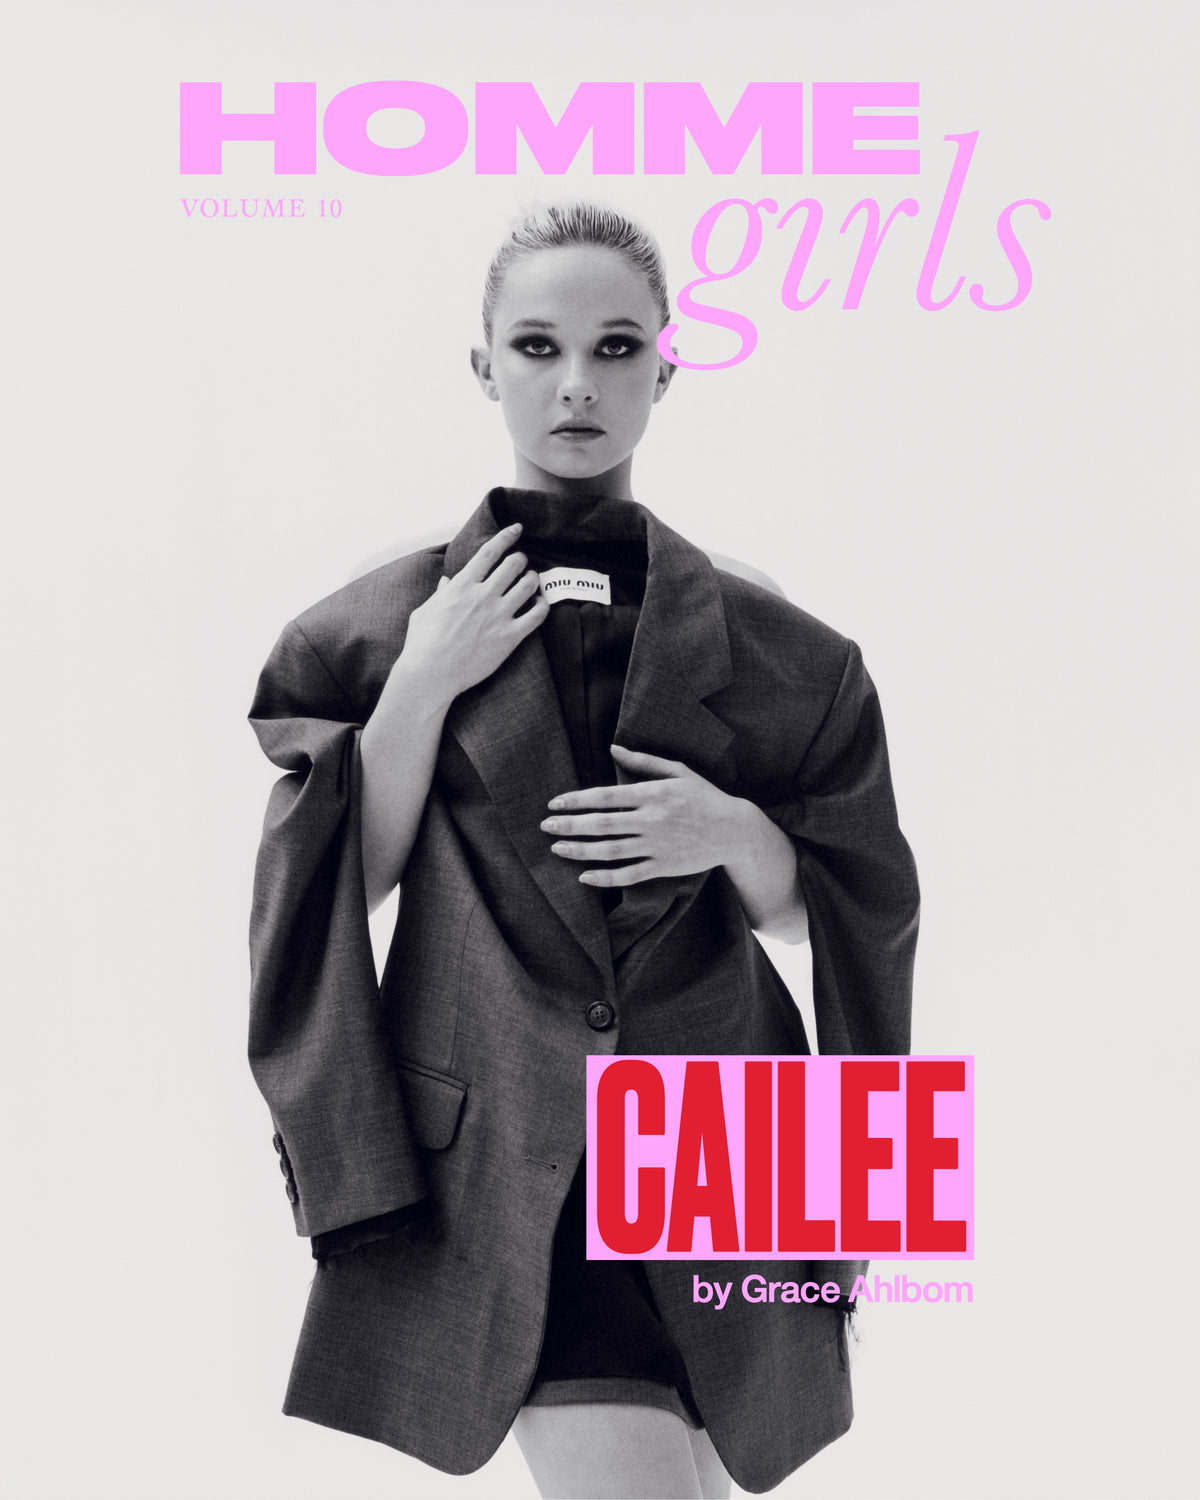 VOLUME 10 - CAILEE